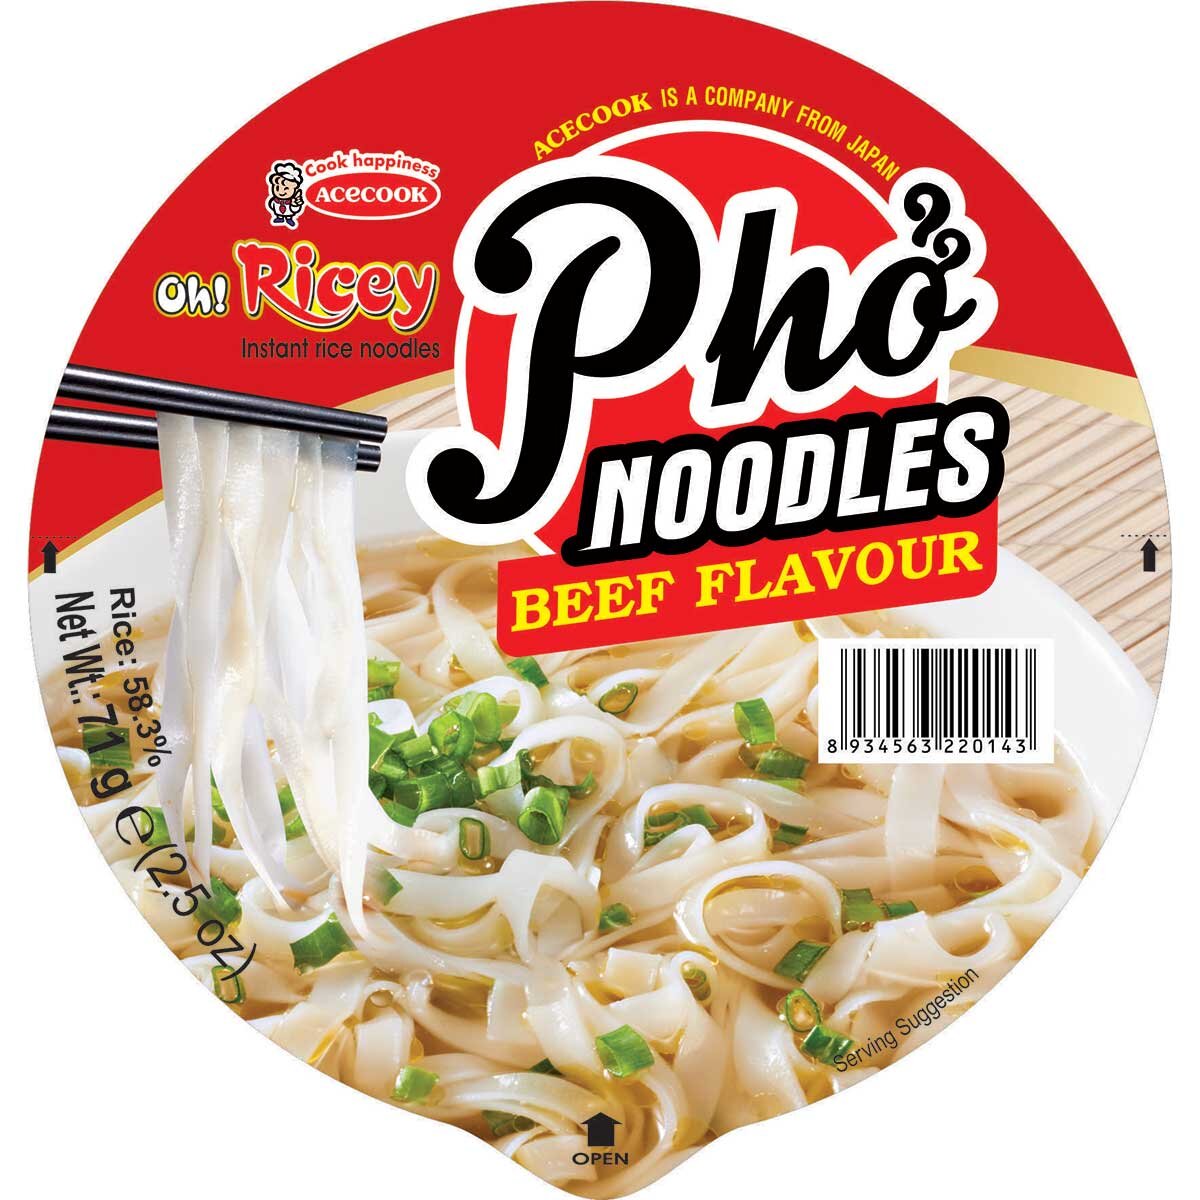 Oh! Ricey Pho Noodles Beef Flavour, 71g